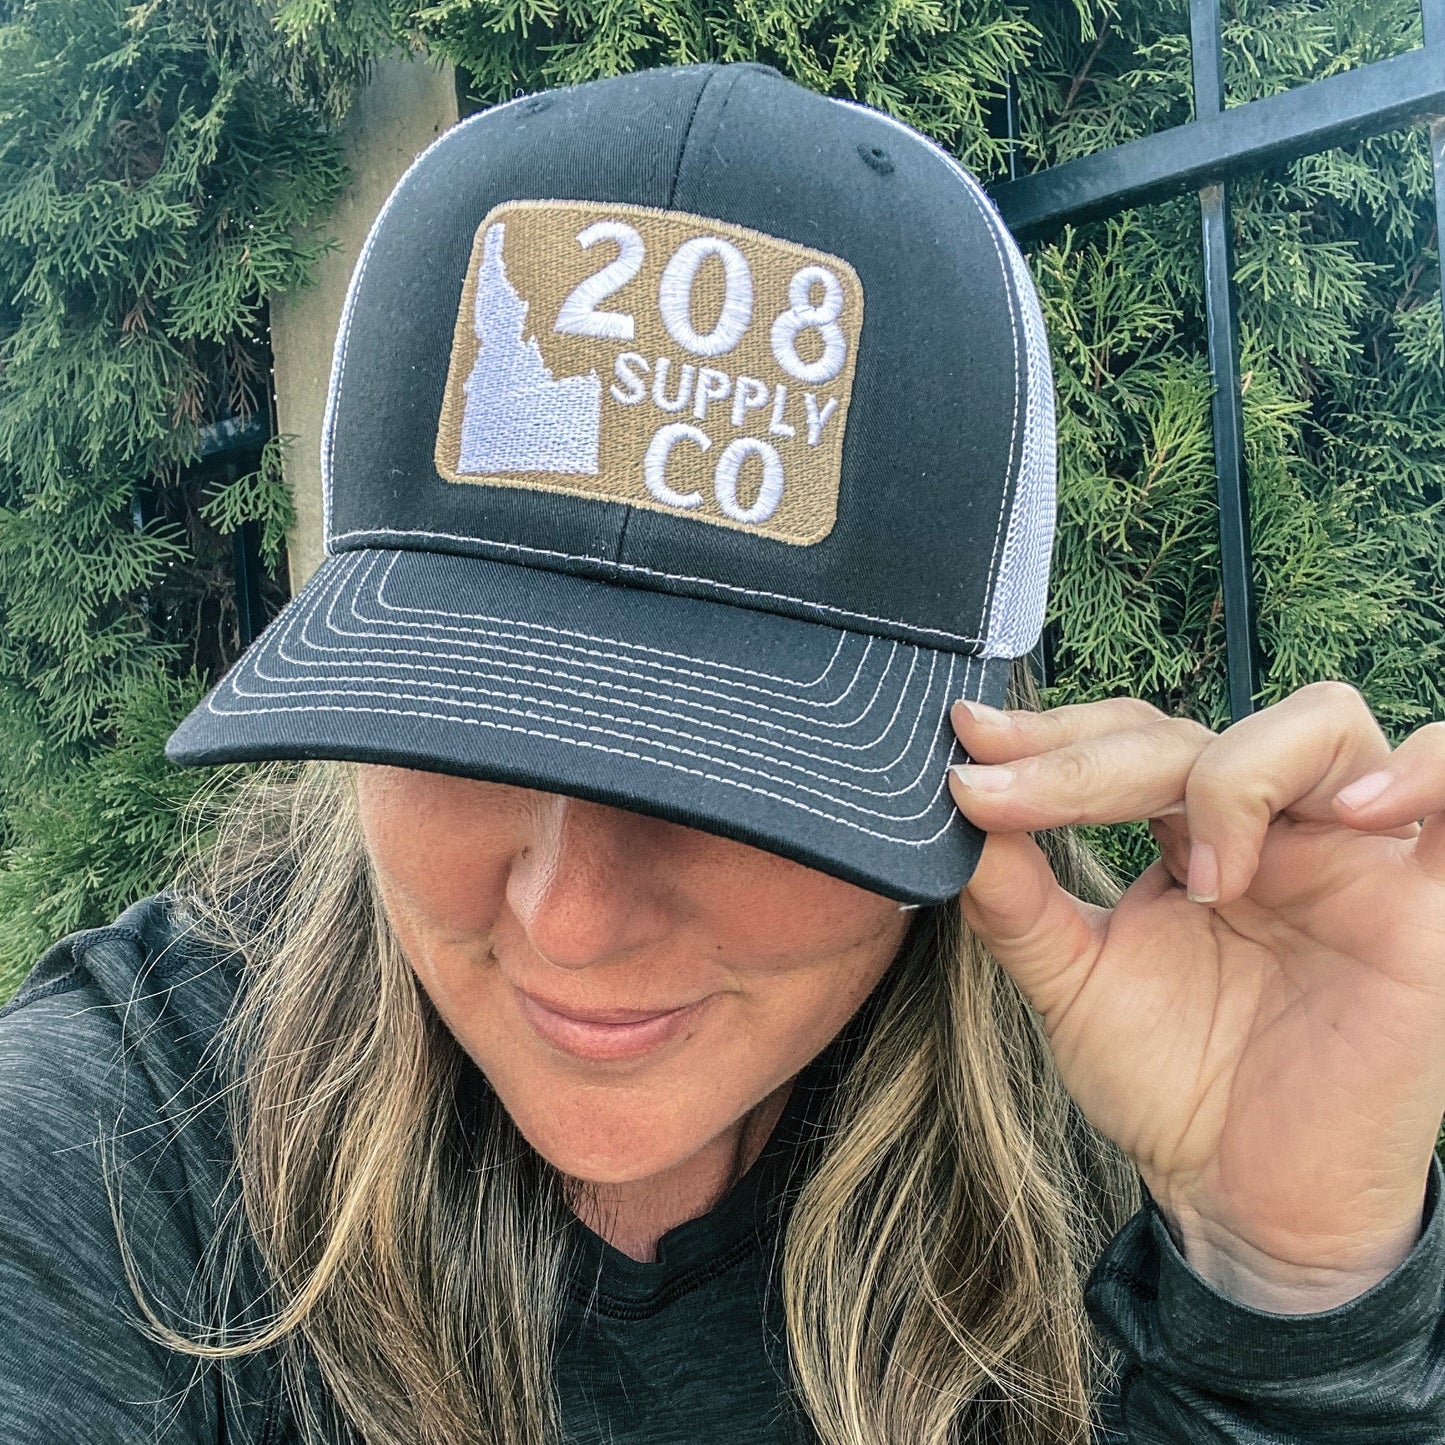 208 Supply Co Hat Black/White 208 Supply Co Hat